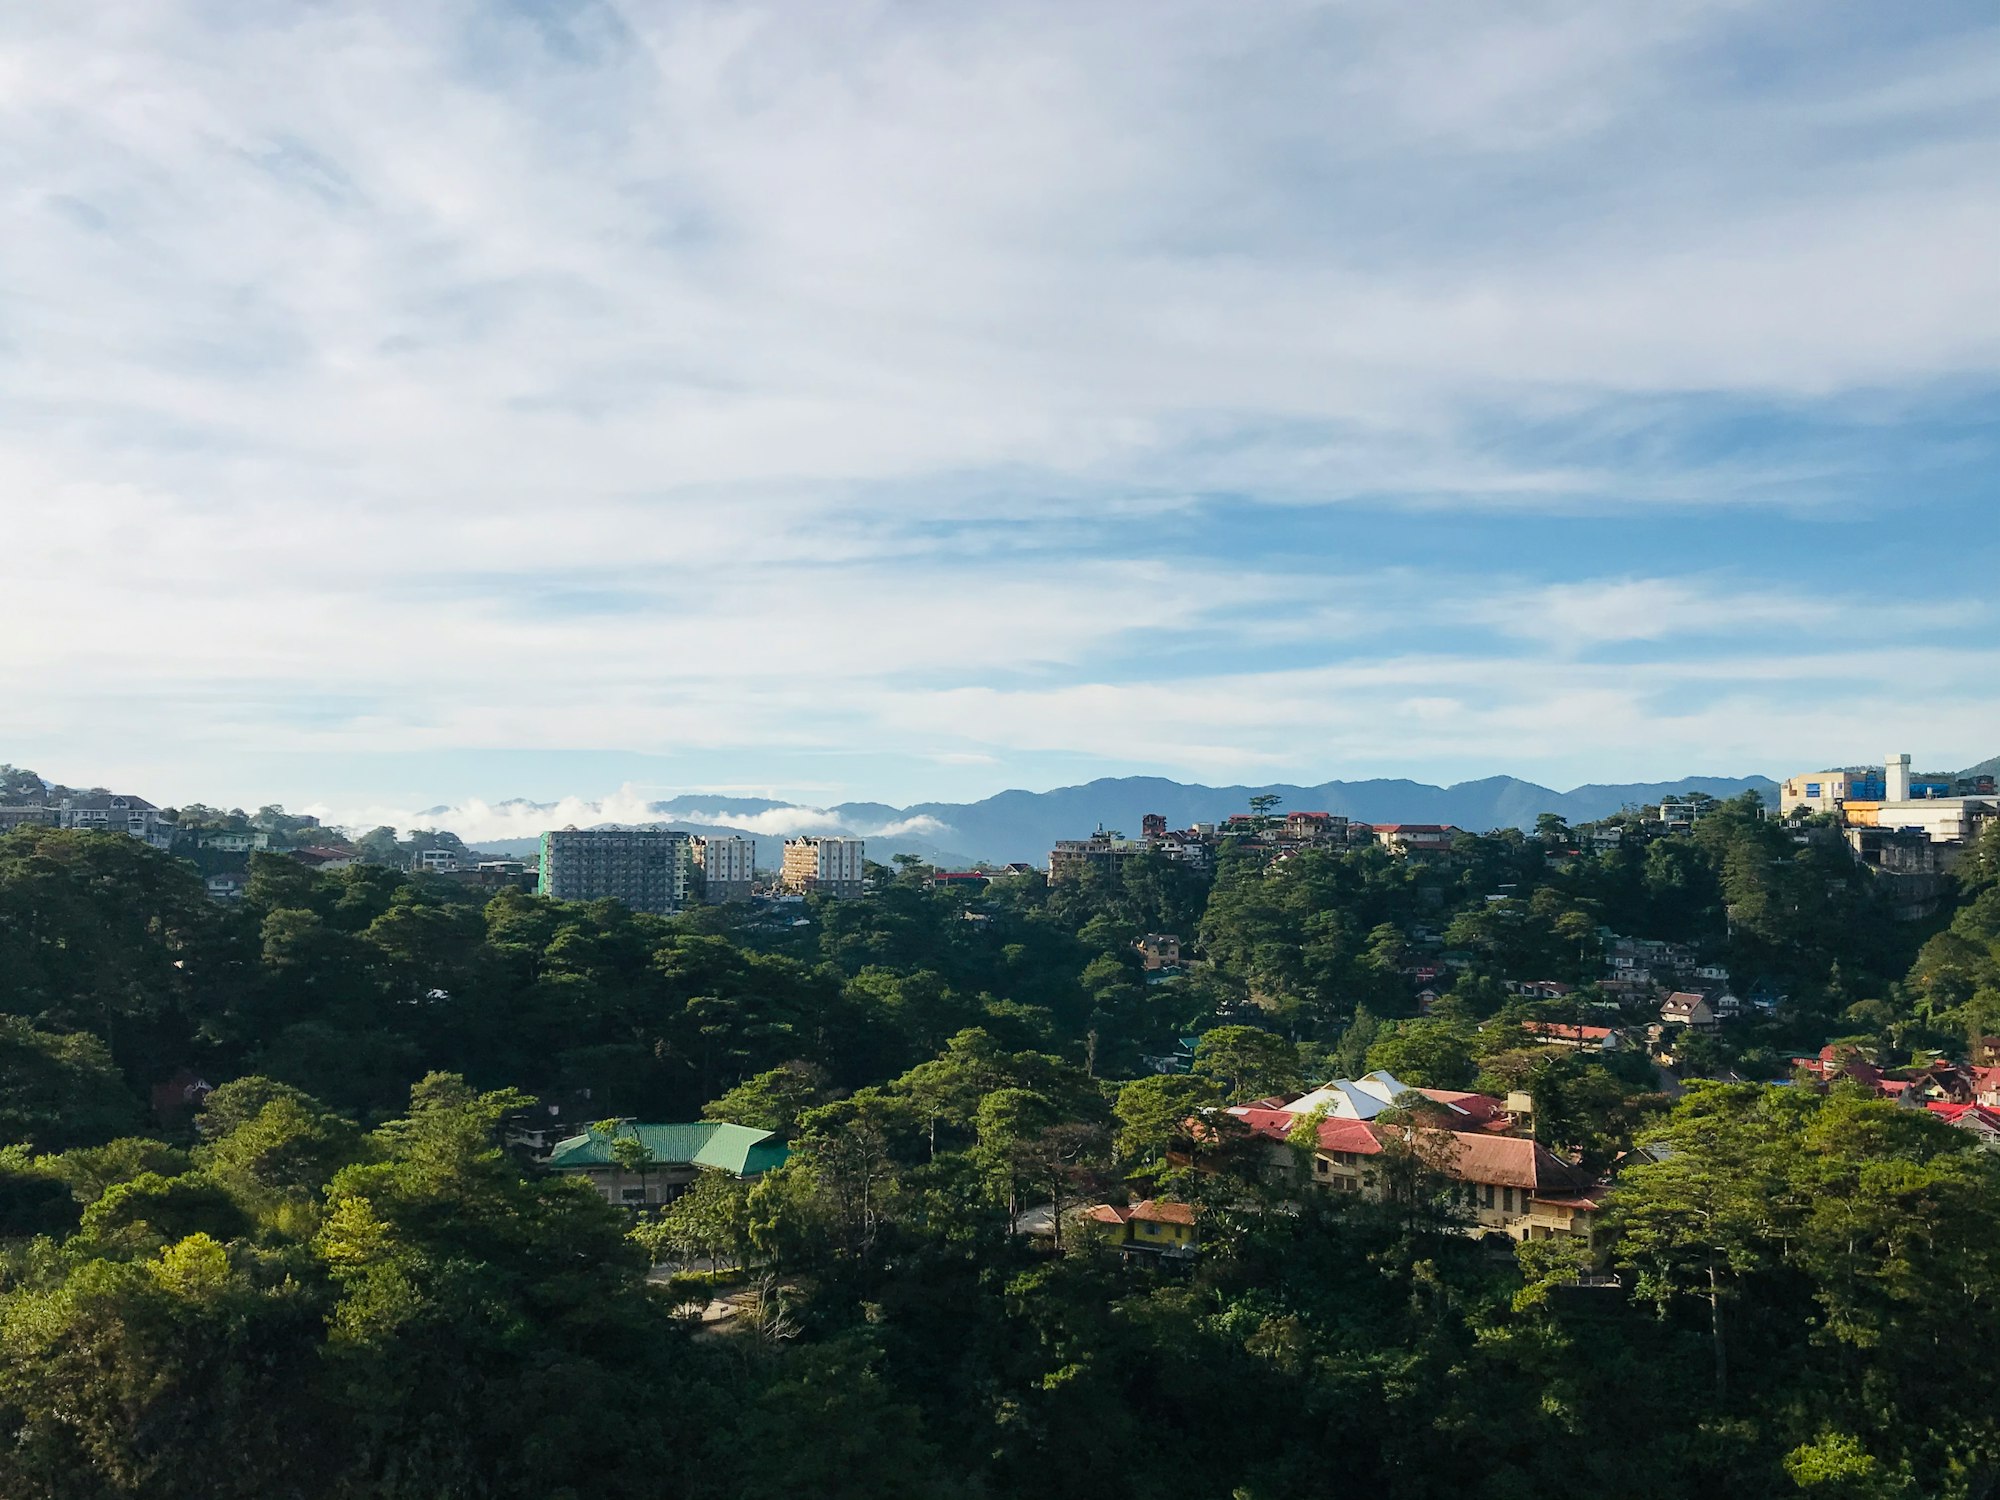 The highlands of Baguio with lush vegetation.